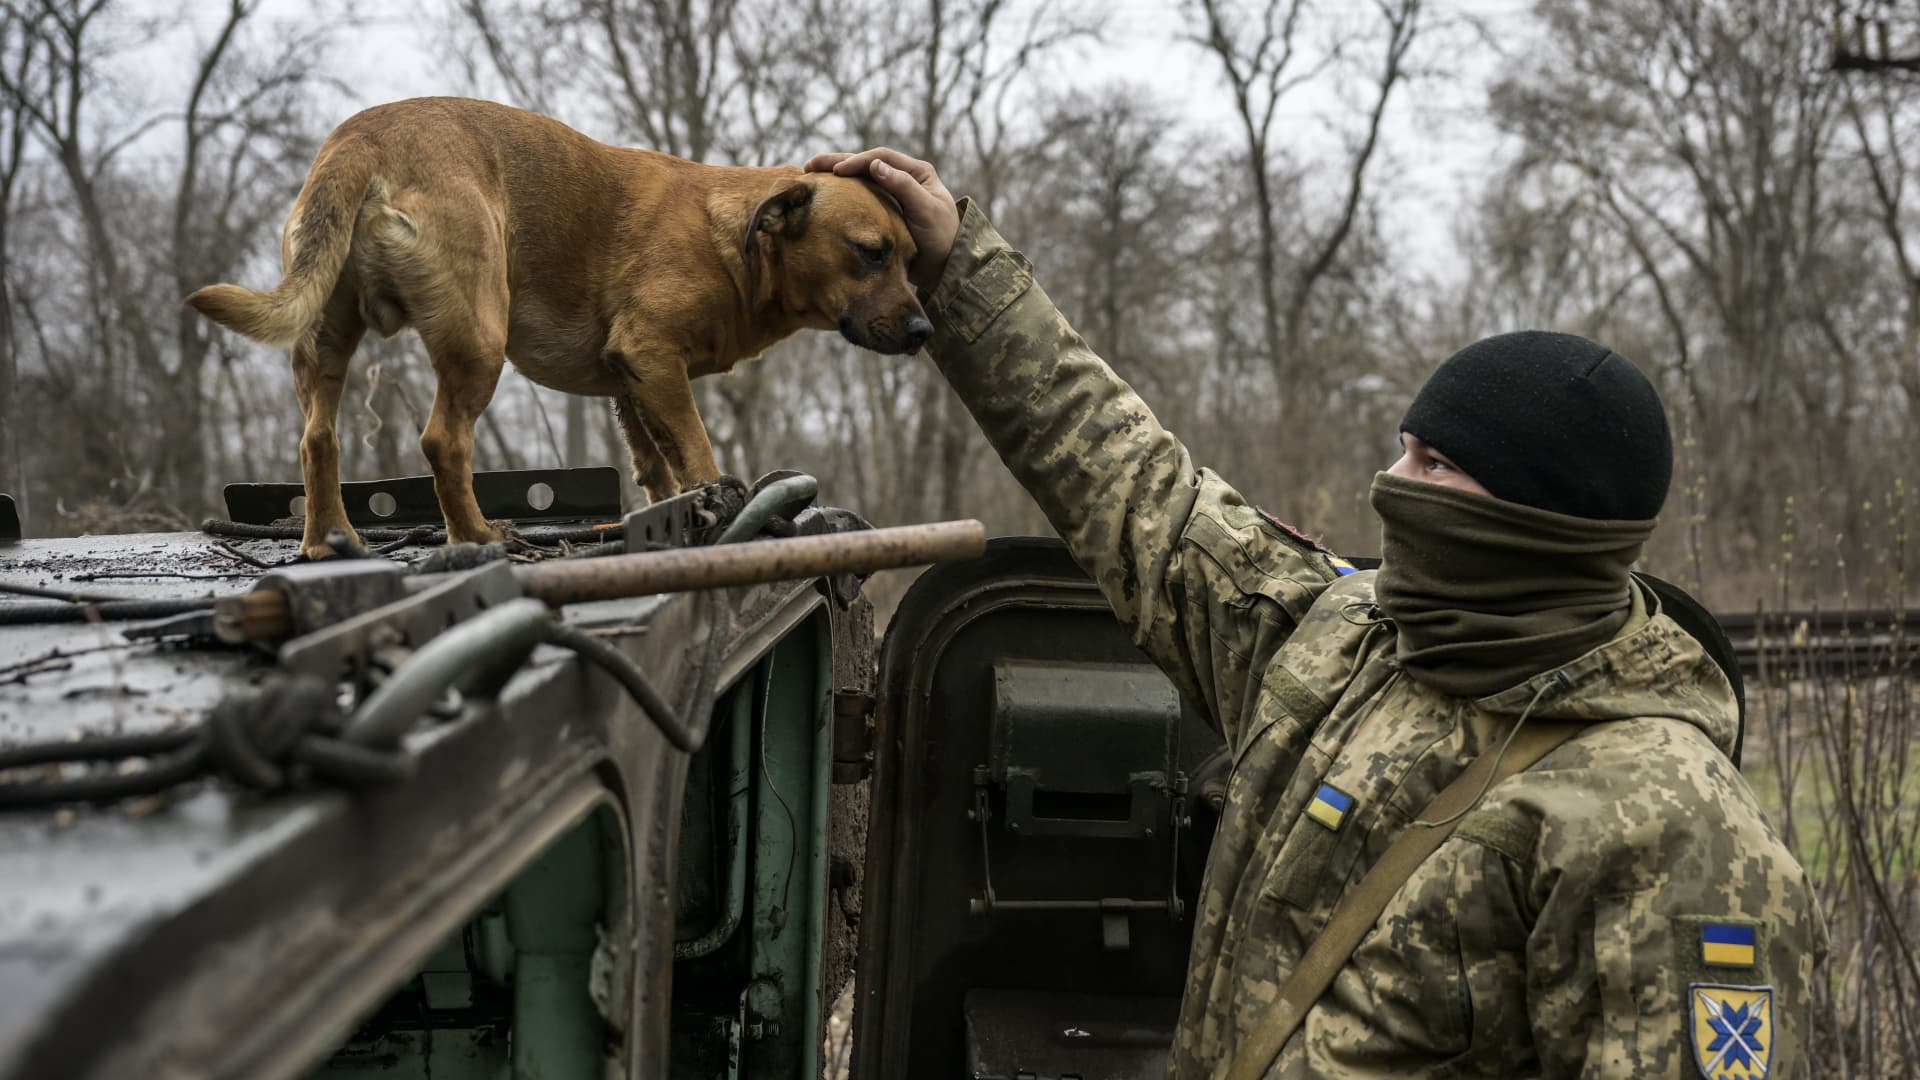 A Ukrainian soldier with a stray dog next to an armored vehicle in Donetsk Oblast, Ukraine, on March 20, 2023.